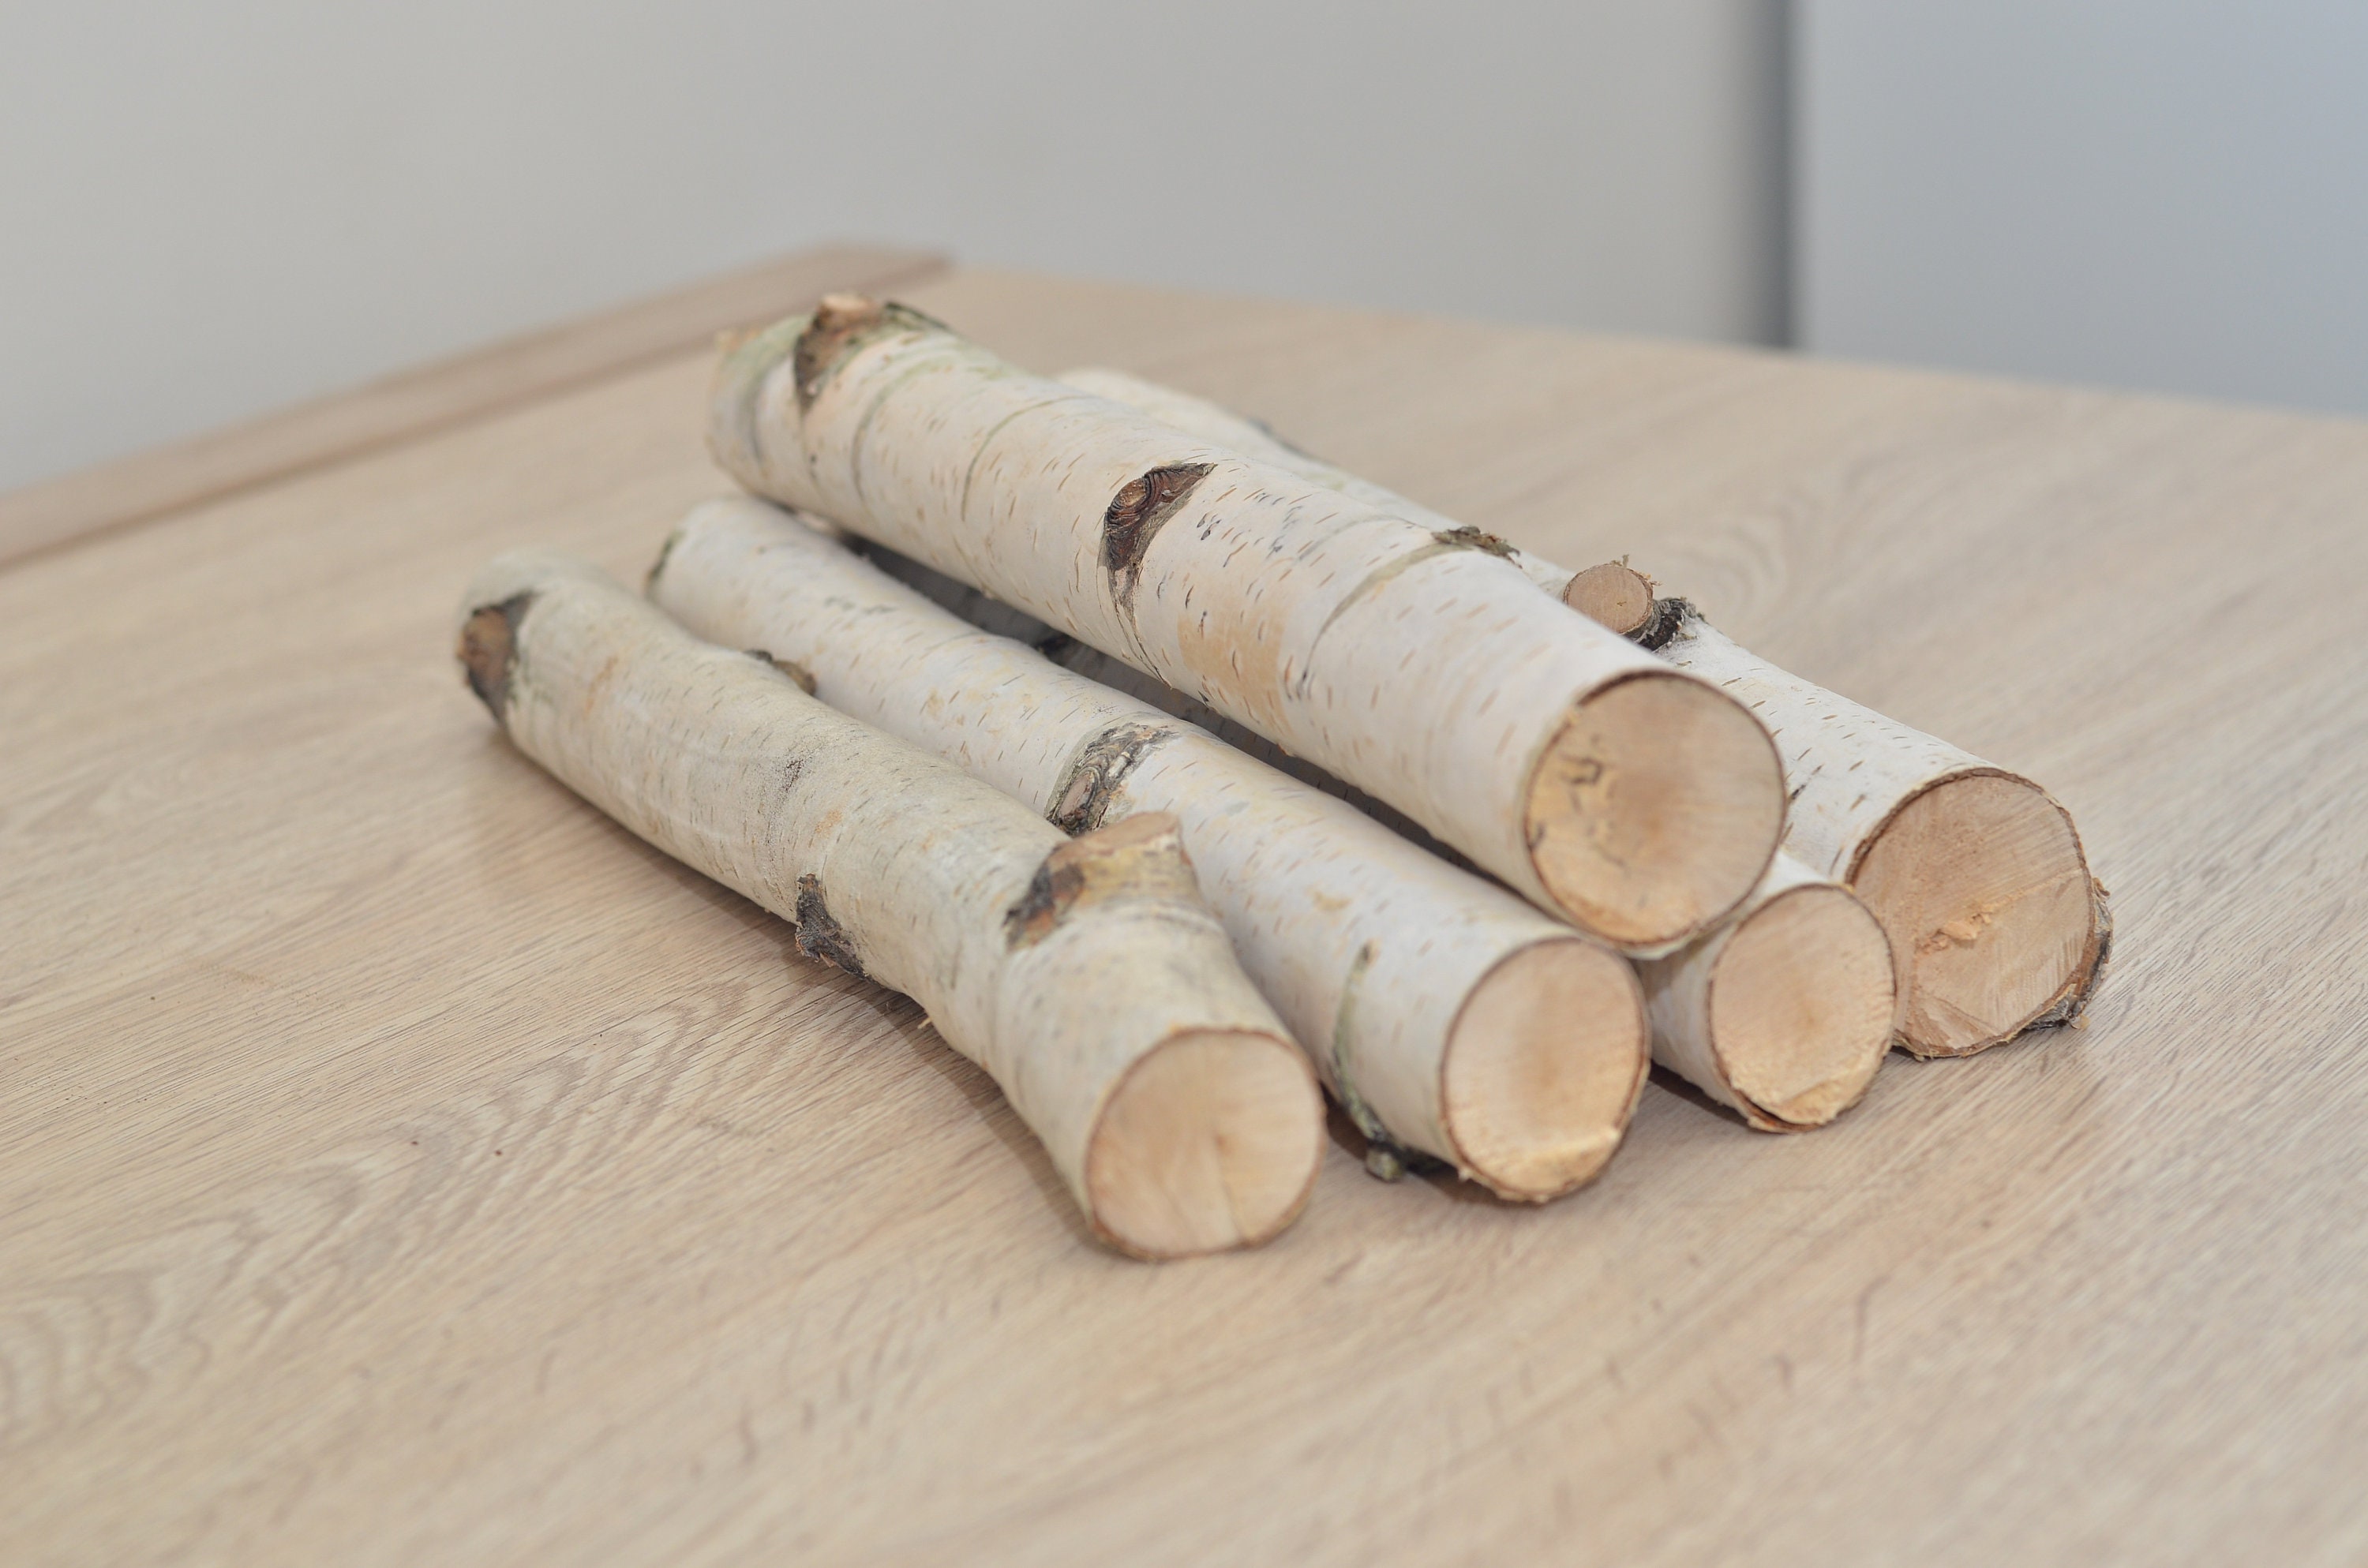 Wilson Decorative White Birch Logs, Natural Bark Wood Home Décor - 17-18  in Length 1.5-4